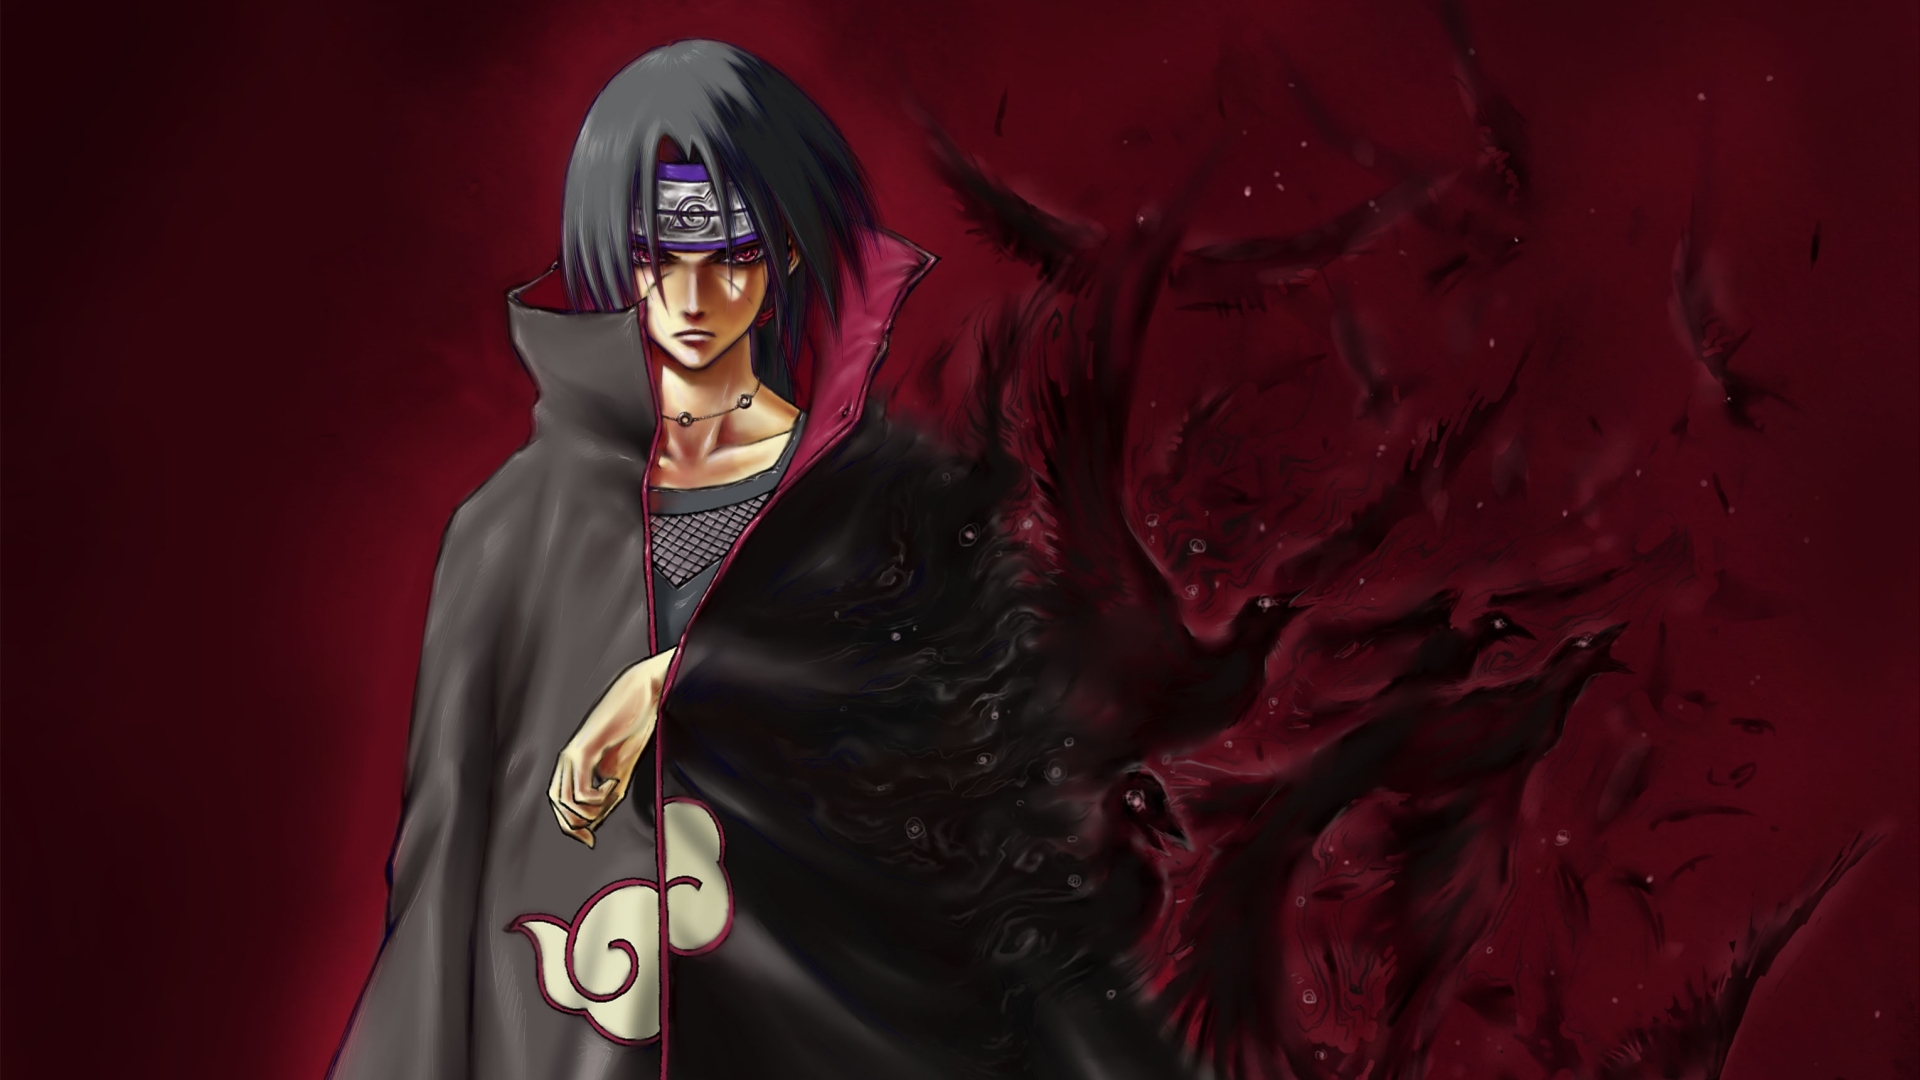 1920x1080 Itachi Uchiha Anime 1080p Laptop Full Hd Wallpaper Hd Anime 4k Wallpapers Images Photos And Background Wallpapers Den